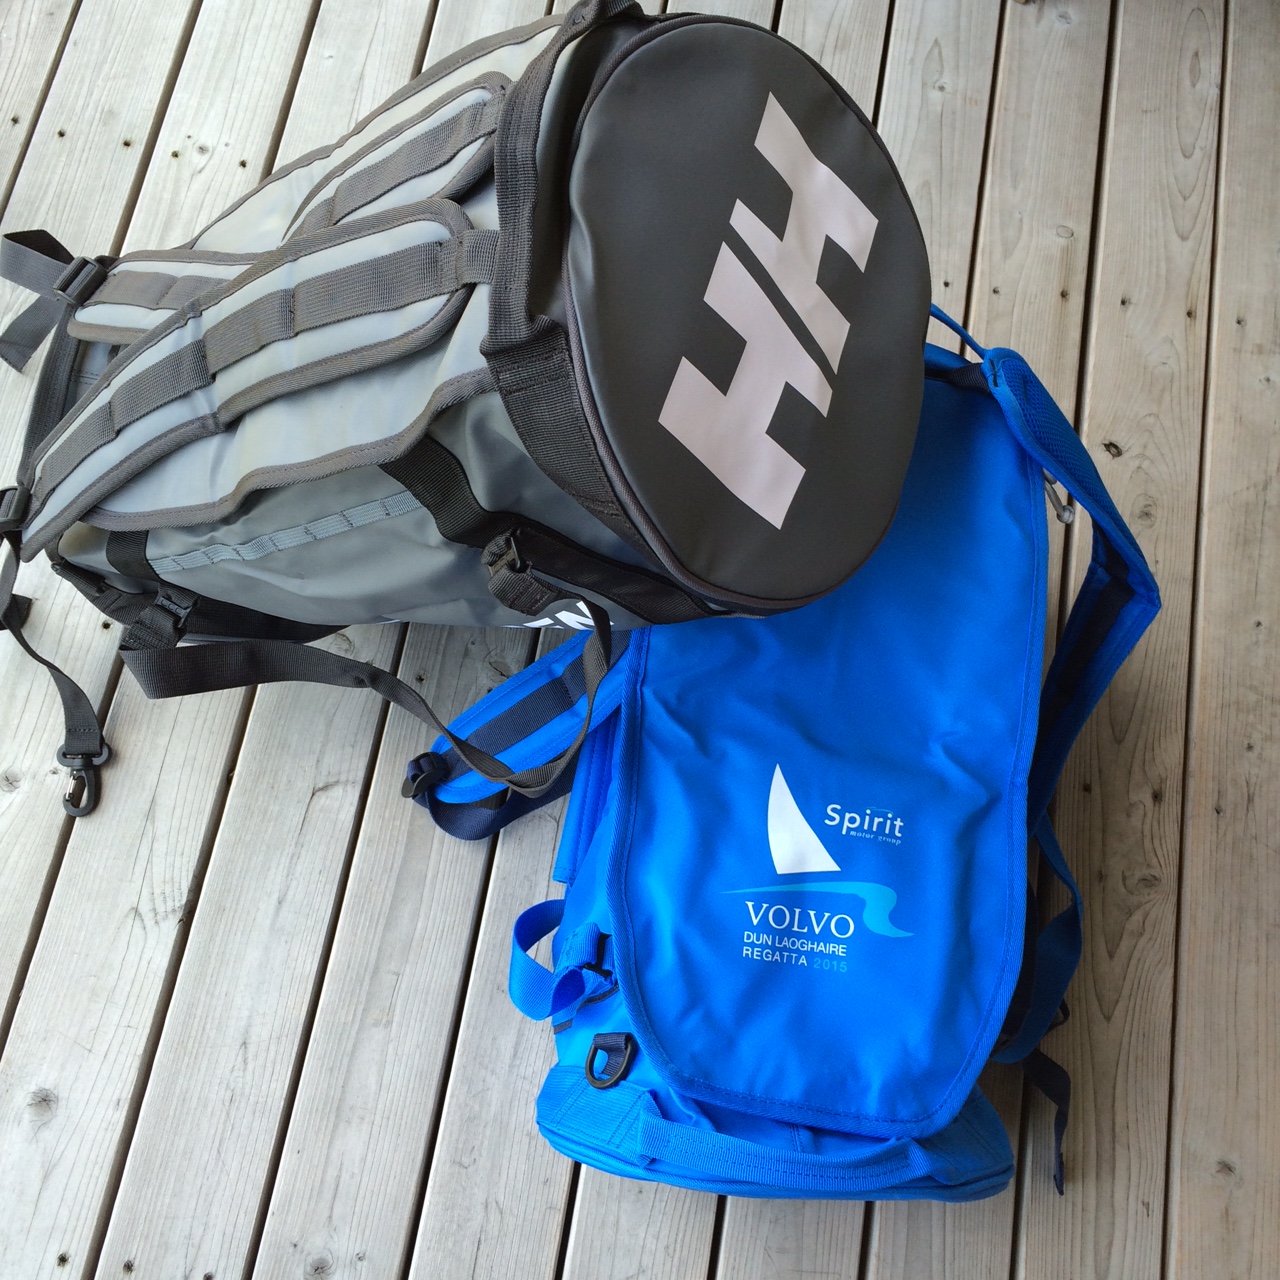 HH Sailing Bag Competition Winners…